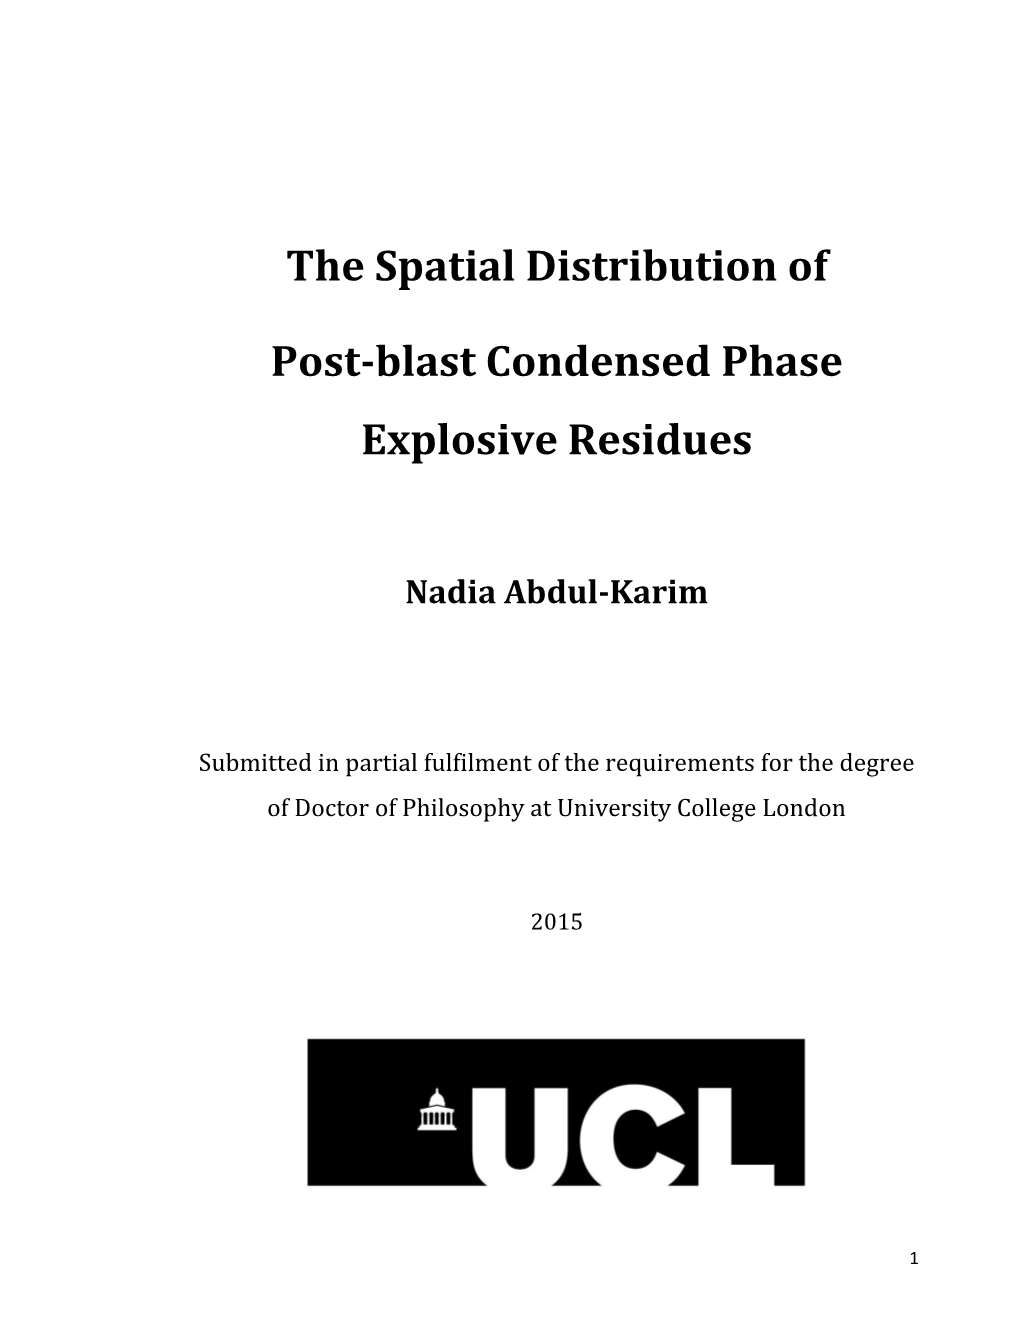 The Spatial Distribution of Post-Blast Condensed Phase Explosive